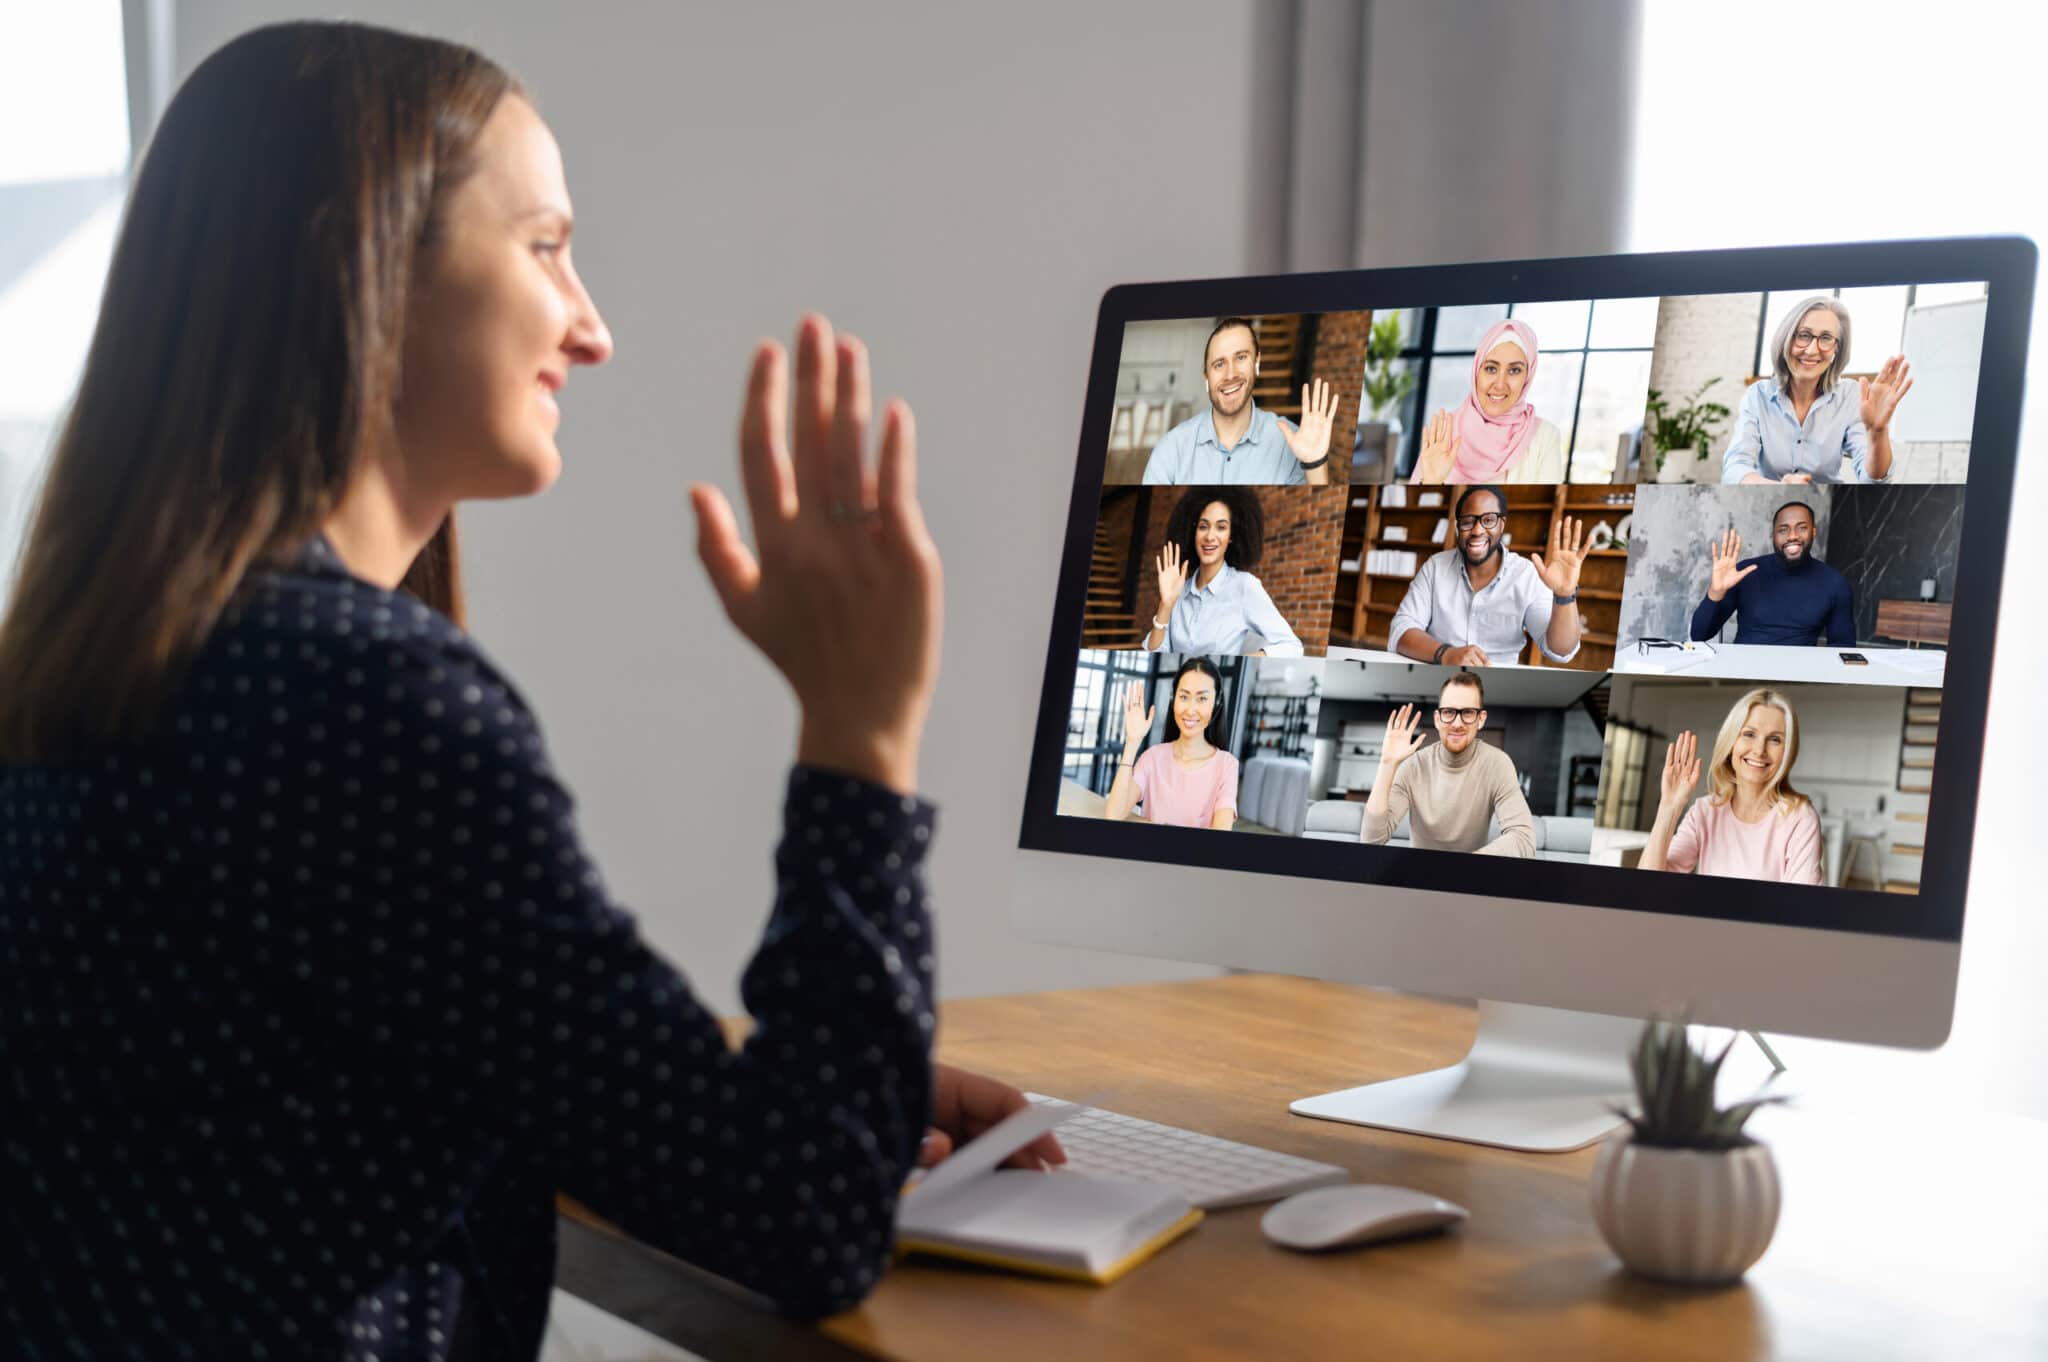 Online video discussion with many people together. Young woman sits in front of laptop with many icons, photo profiles of people on screen. App for video meeting with diverse team